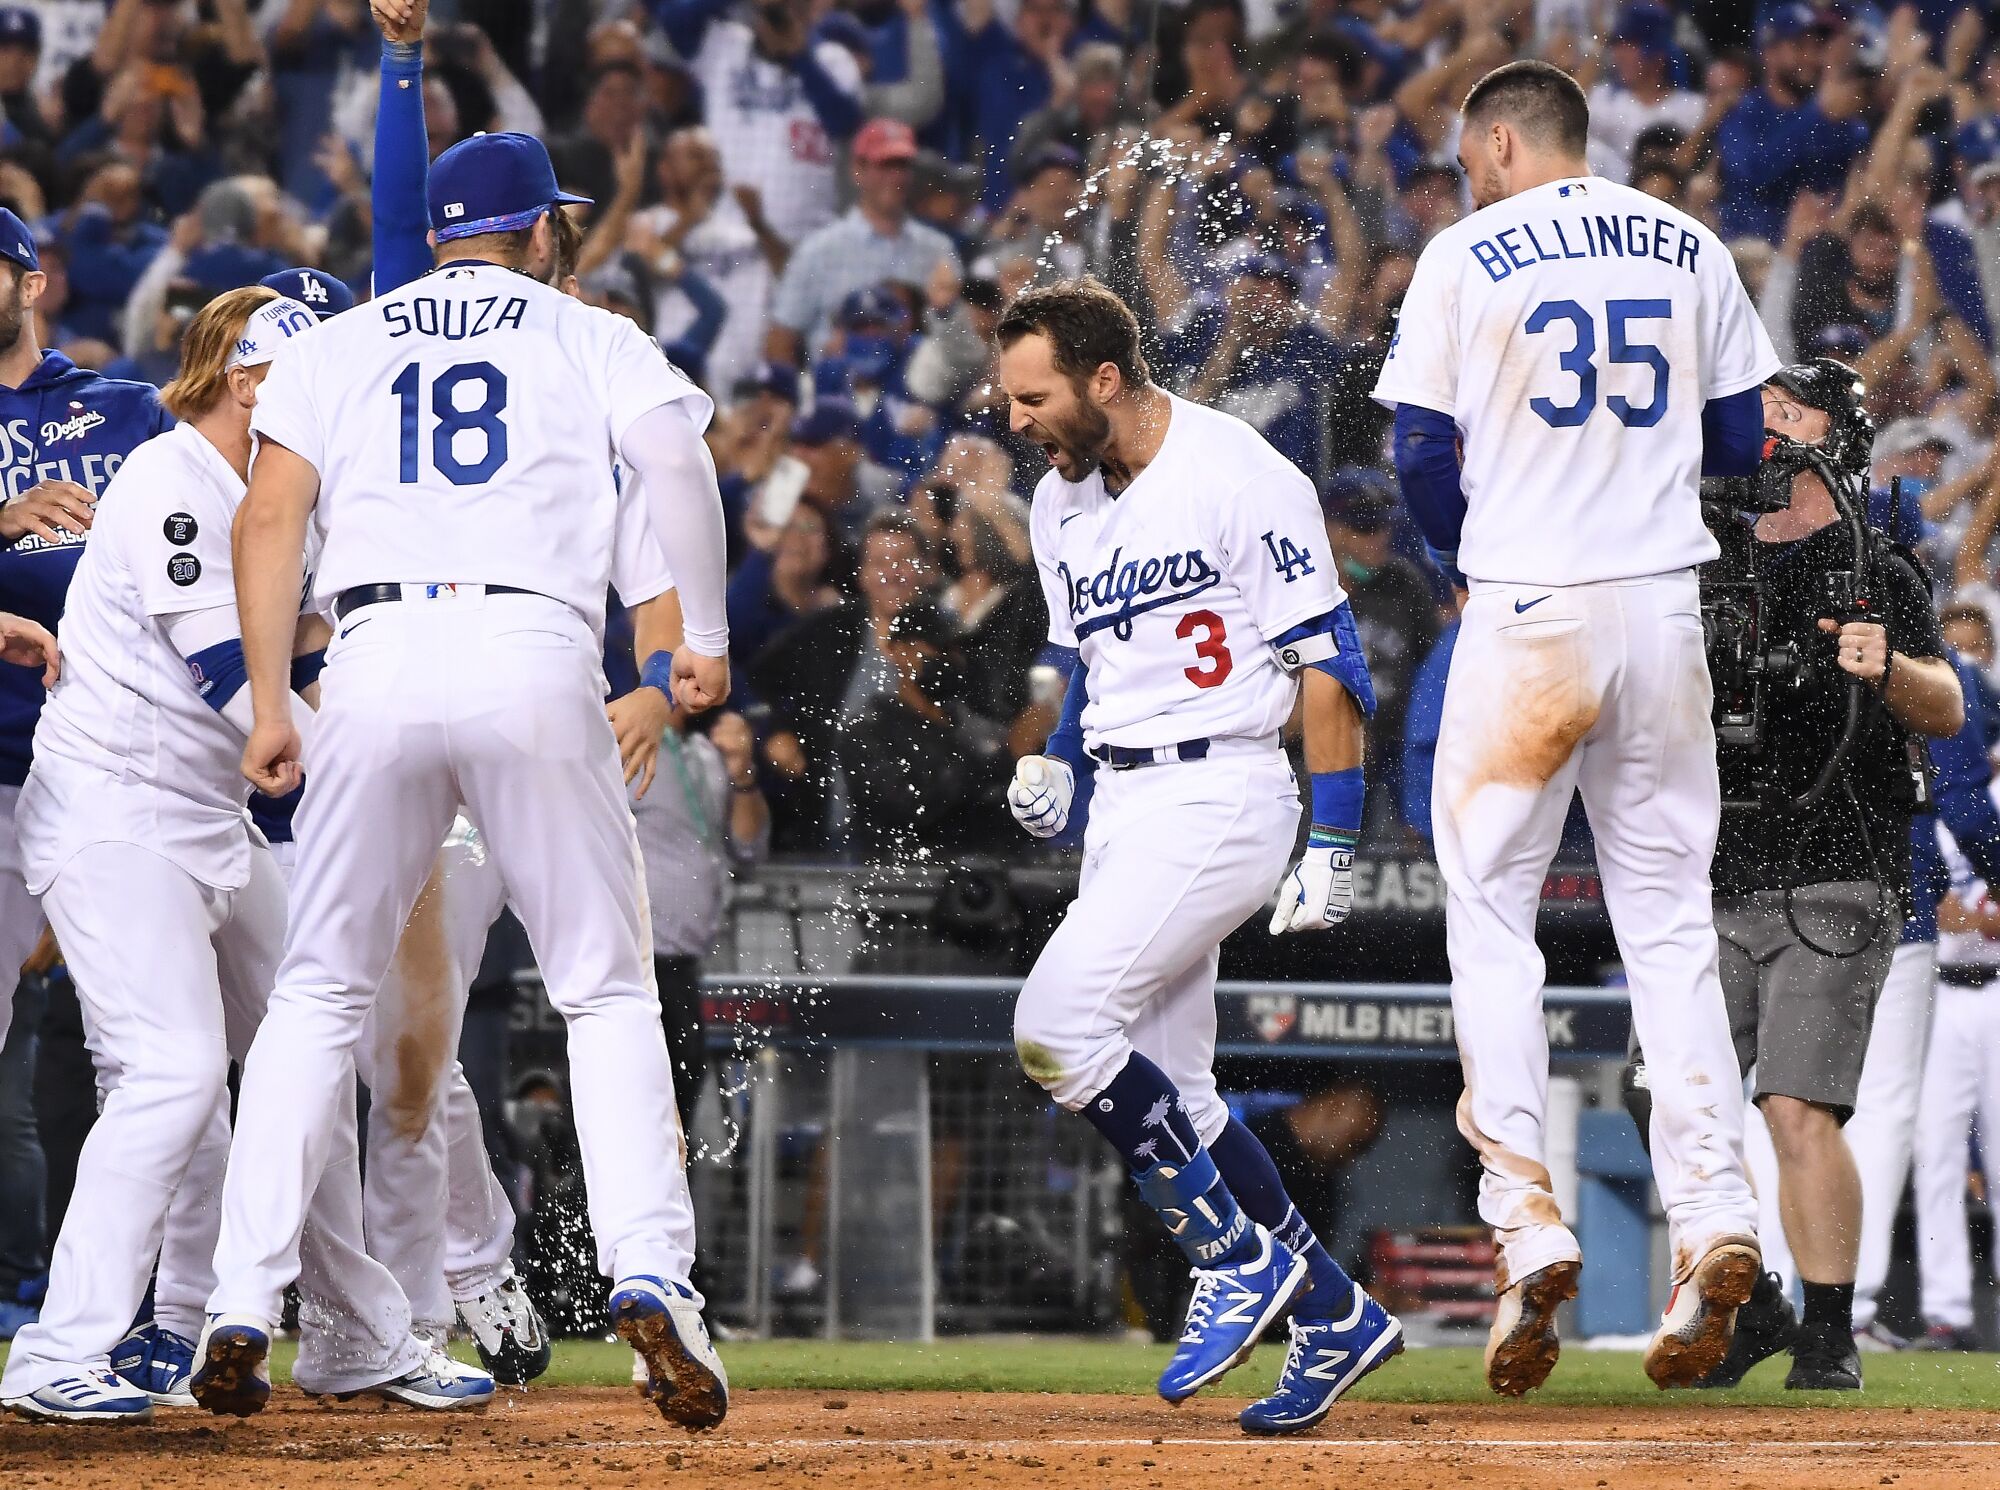 Los Angeles Dodgers left fielder Chris Taylor celebrates while crossing home after hitting the game-winning home run